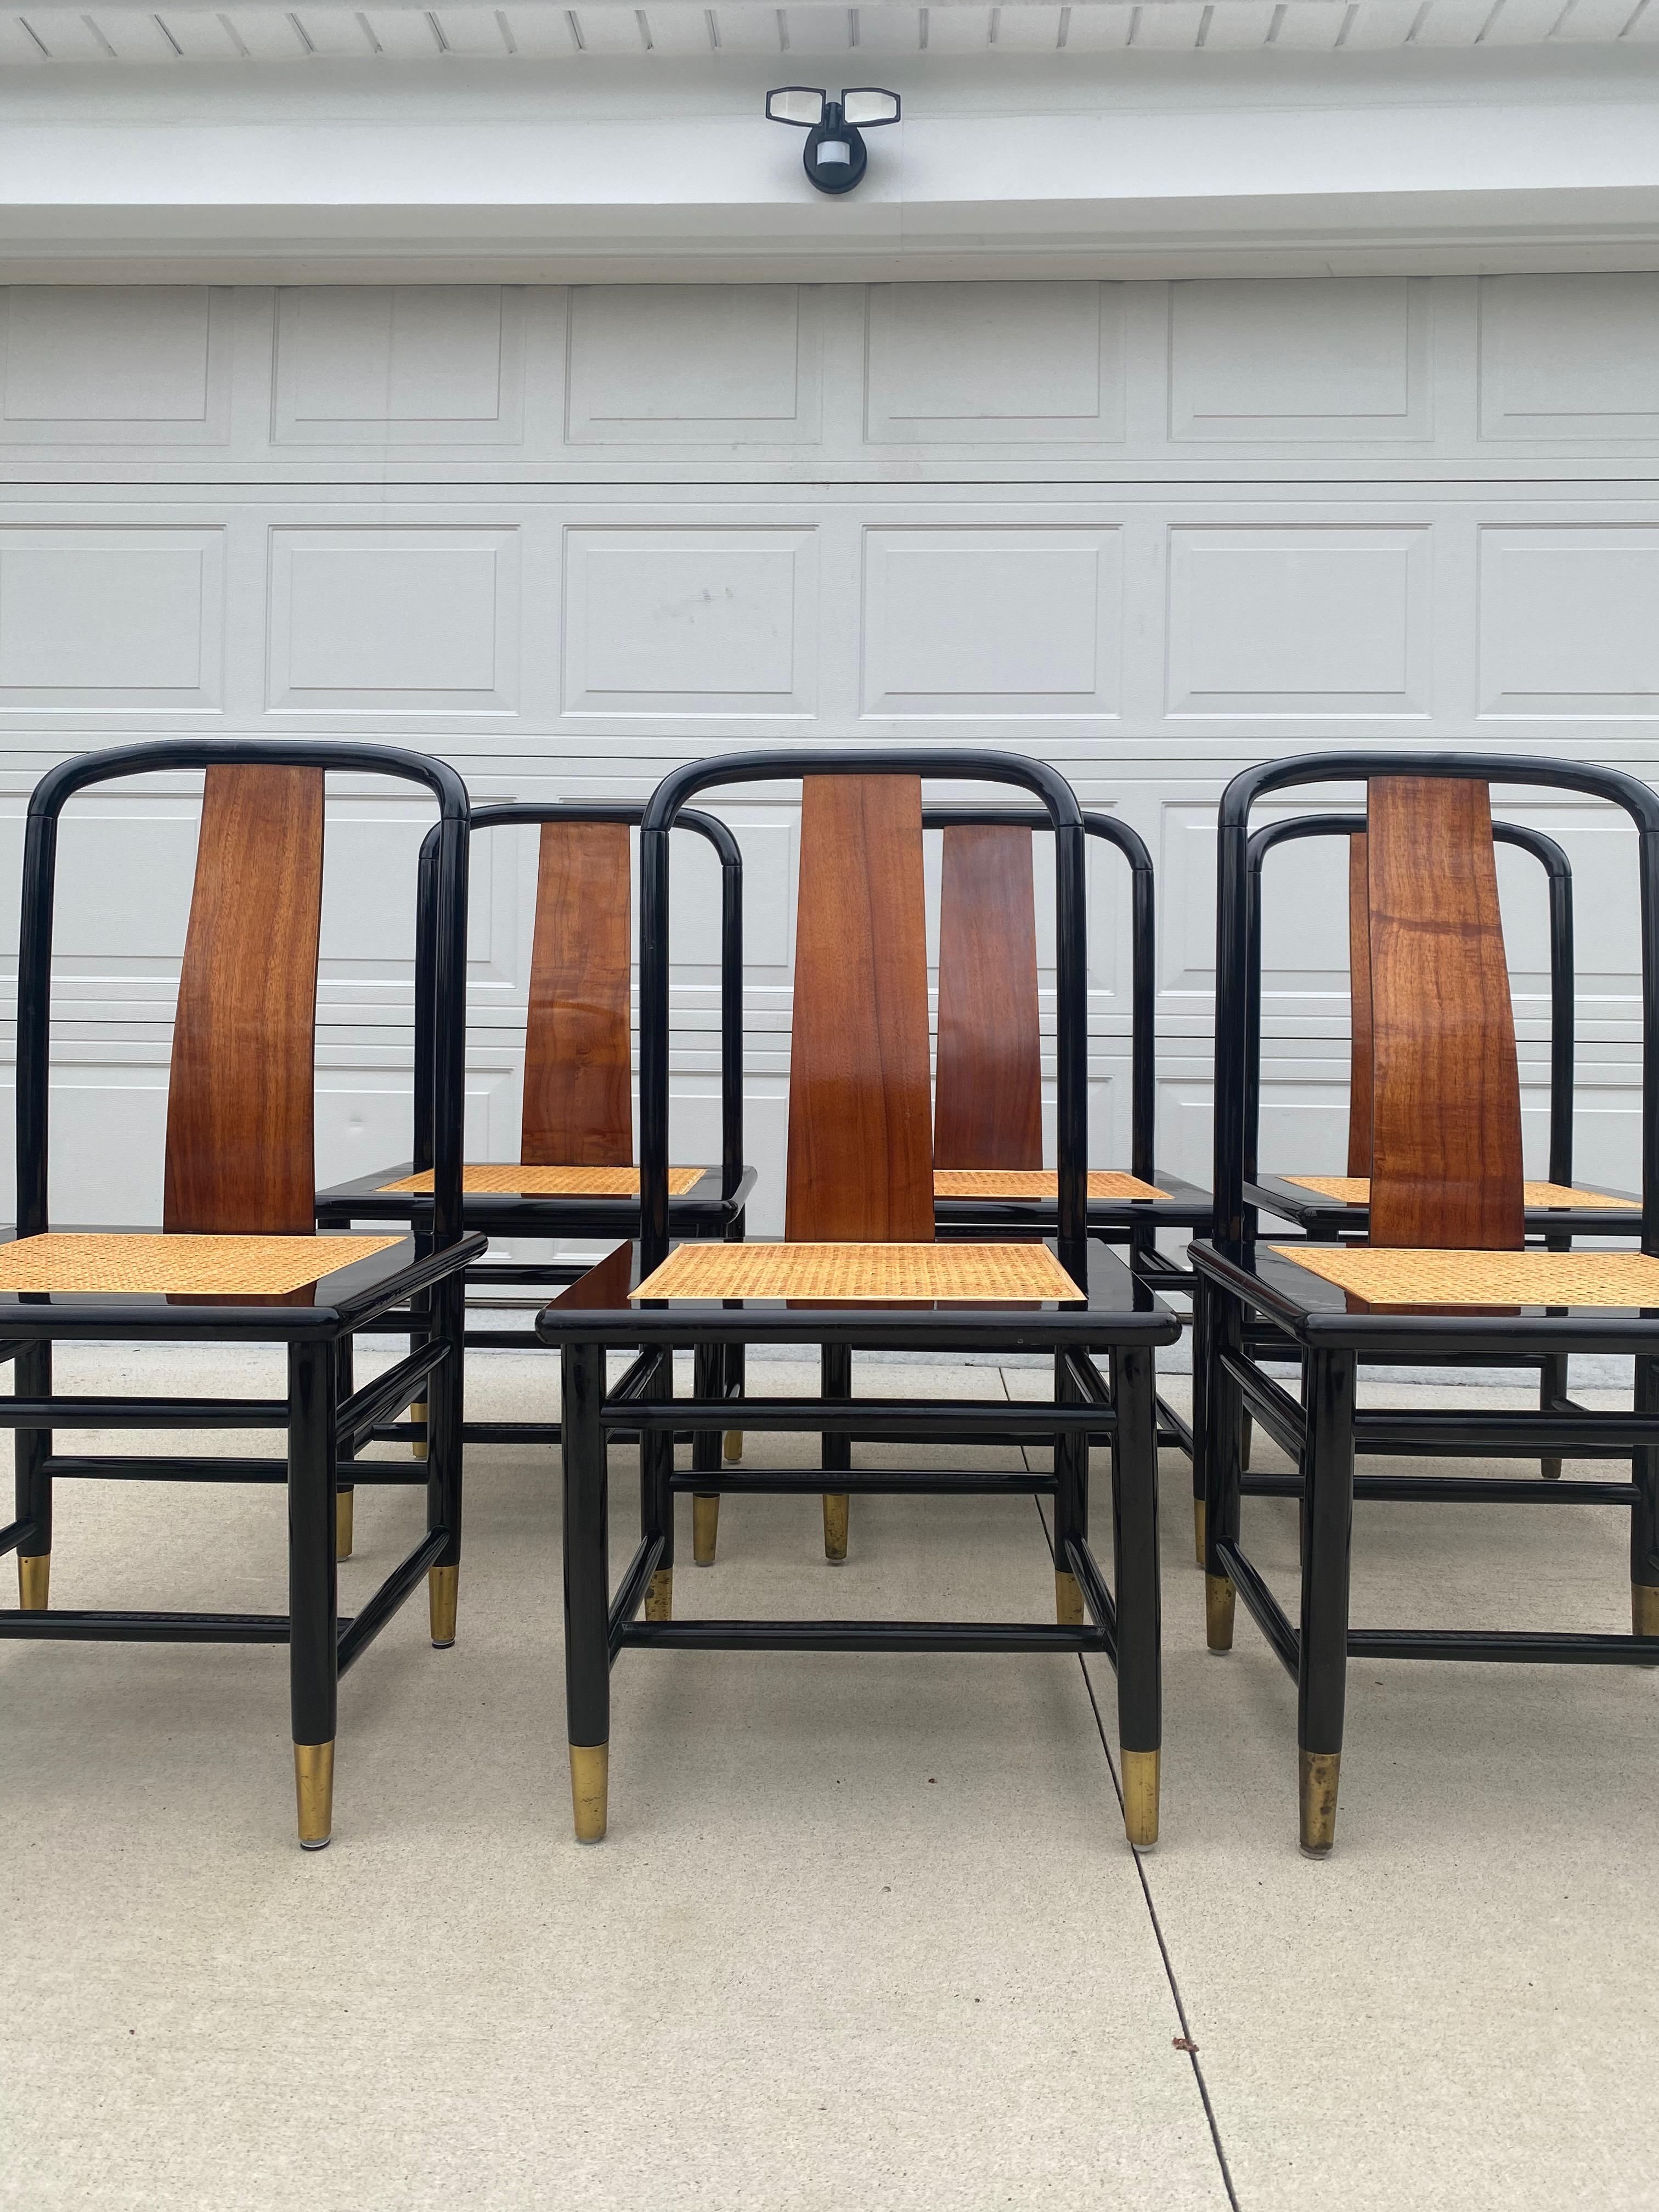 Set of 6 Henredon Scene III Lacquer and Burl Dining Chairs in great condition.  In black lacquer with burl walnut back accents, caned seat panels and brass ferrules, these were a modernist interpretation of the Classic Ming chair designed for the